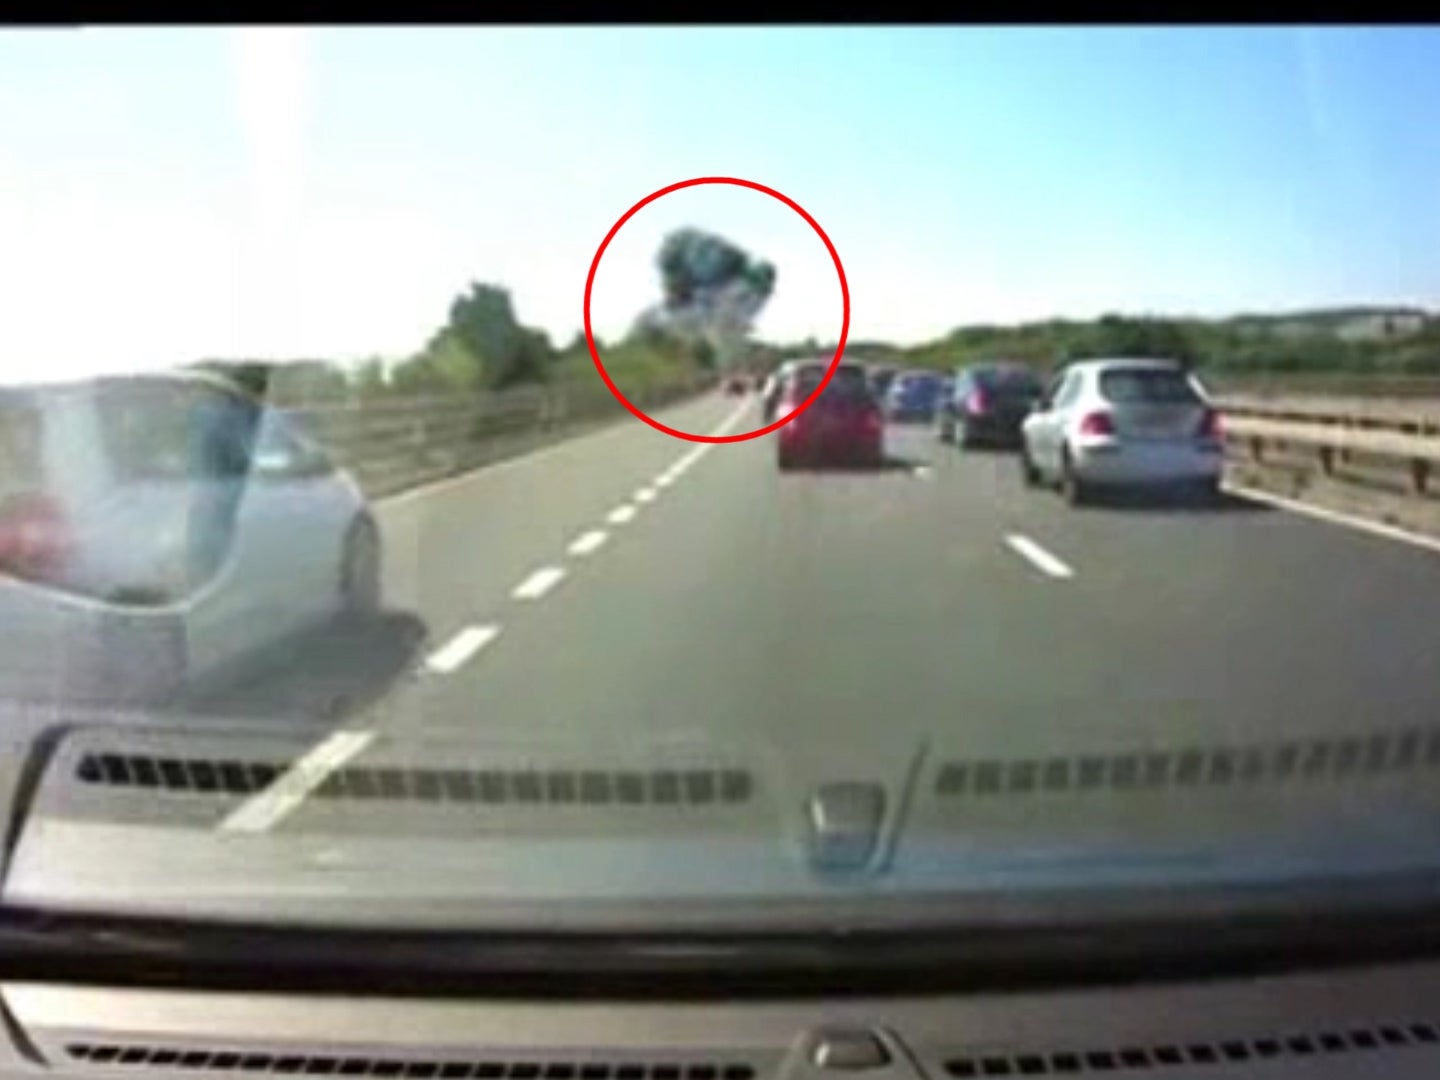 New footage emerges showing the moment the plane plummets into the A27